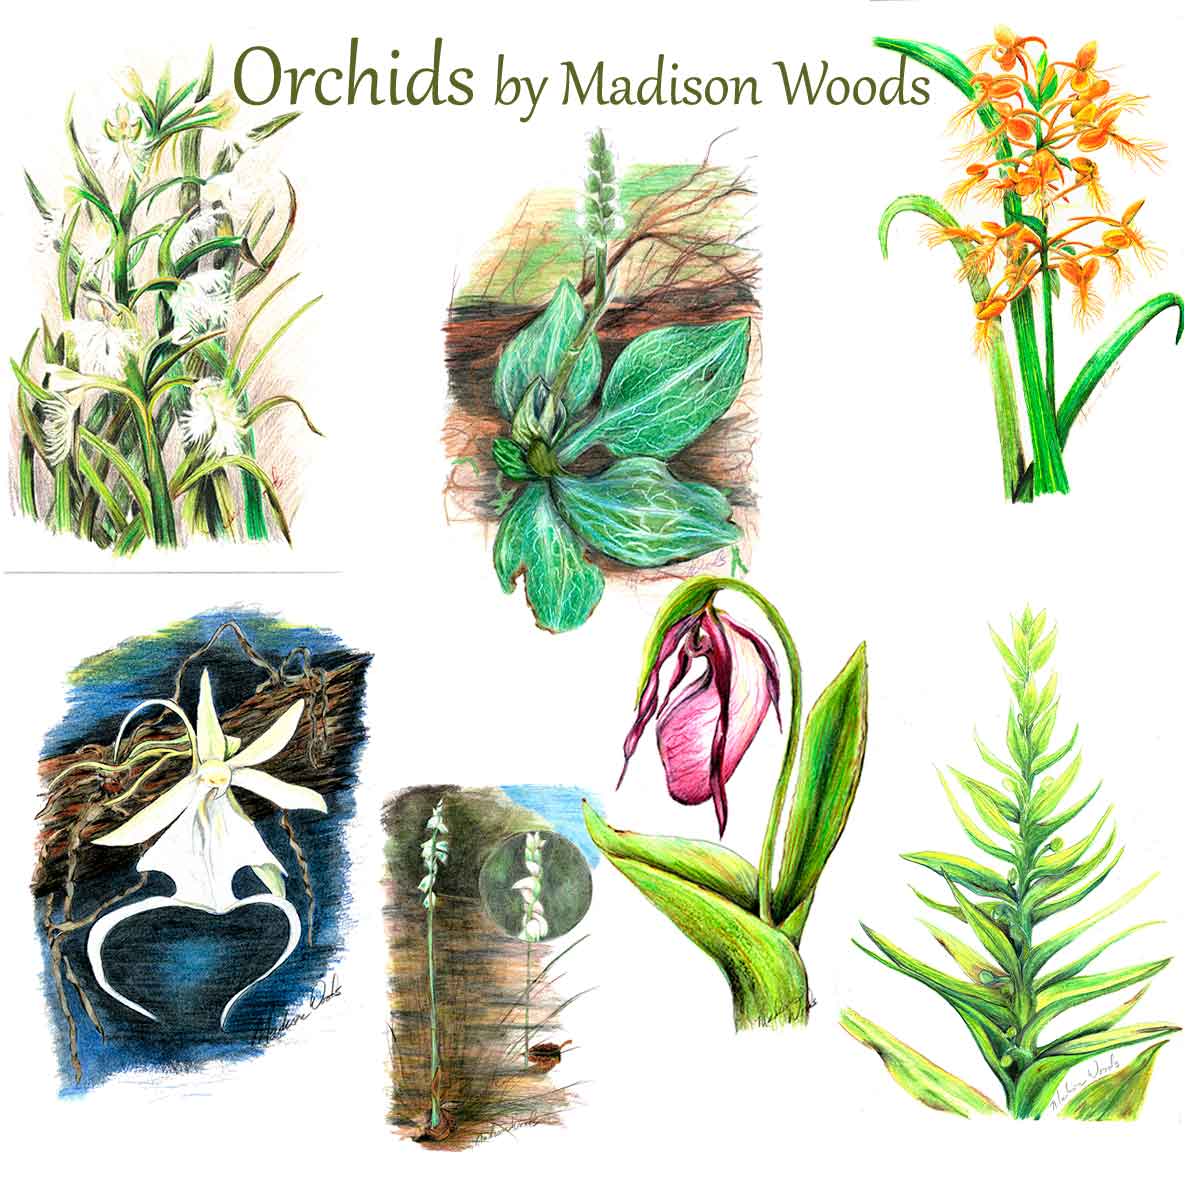 A collection of orchid drawings by Madison Woods.